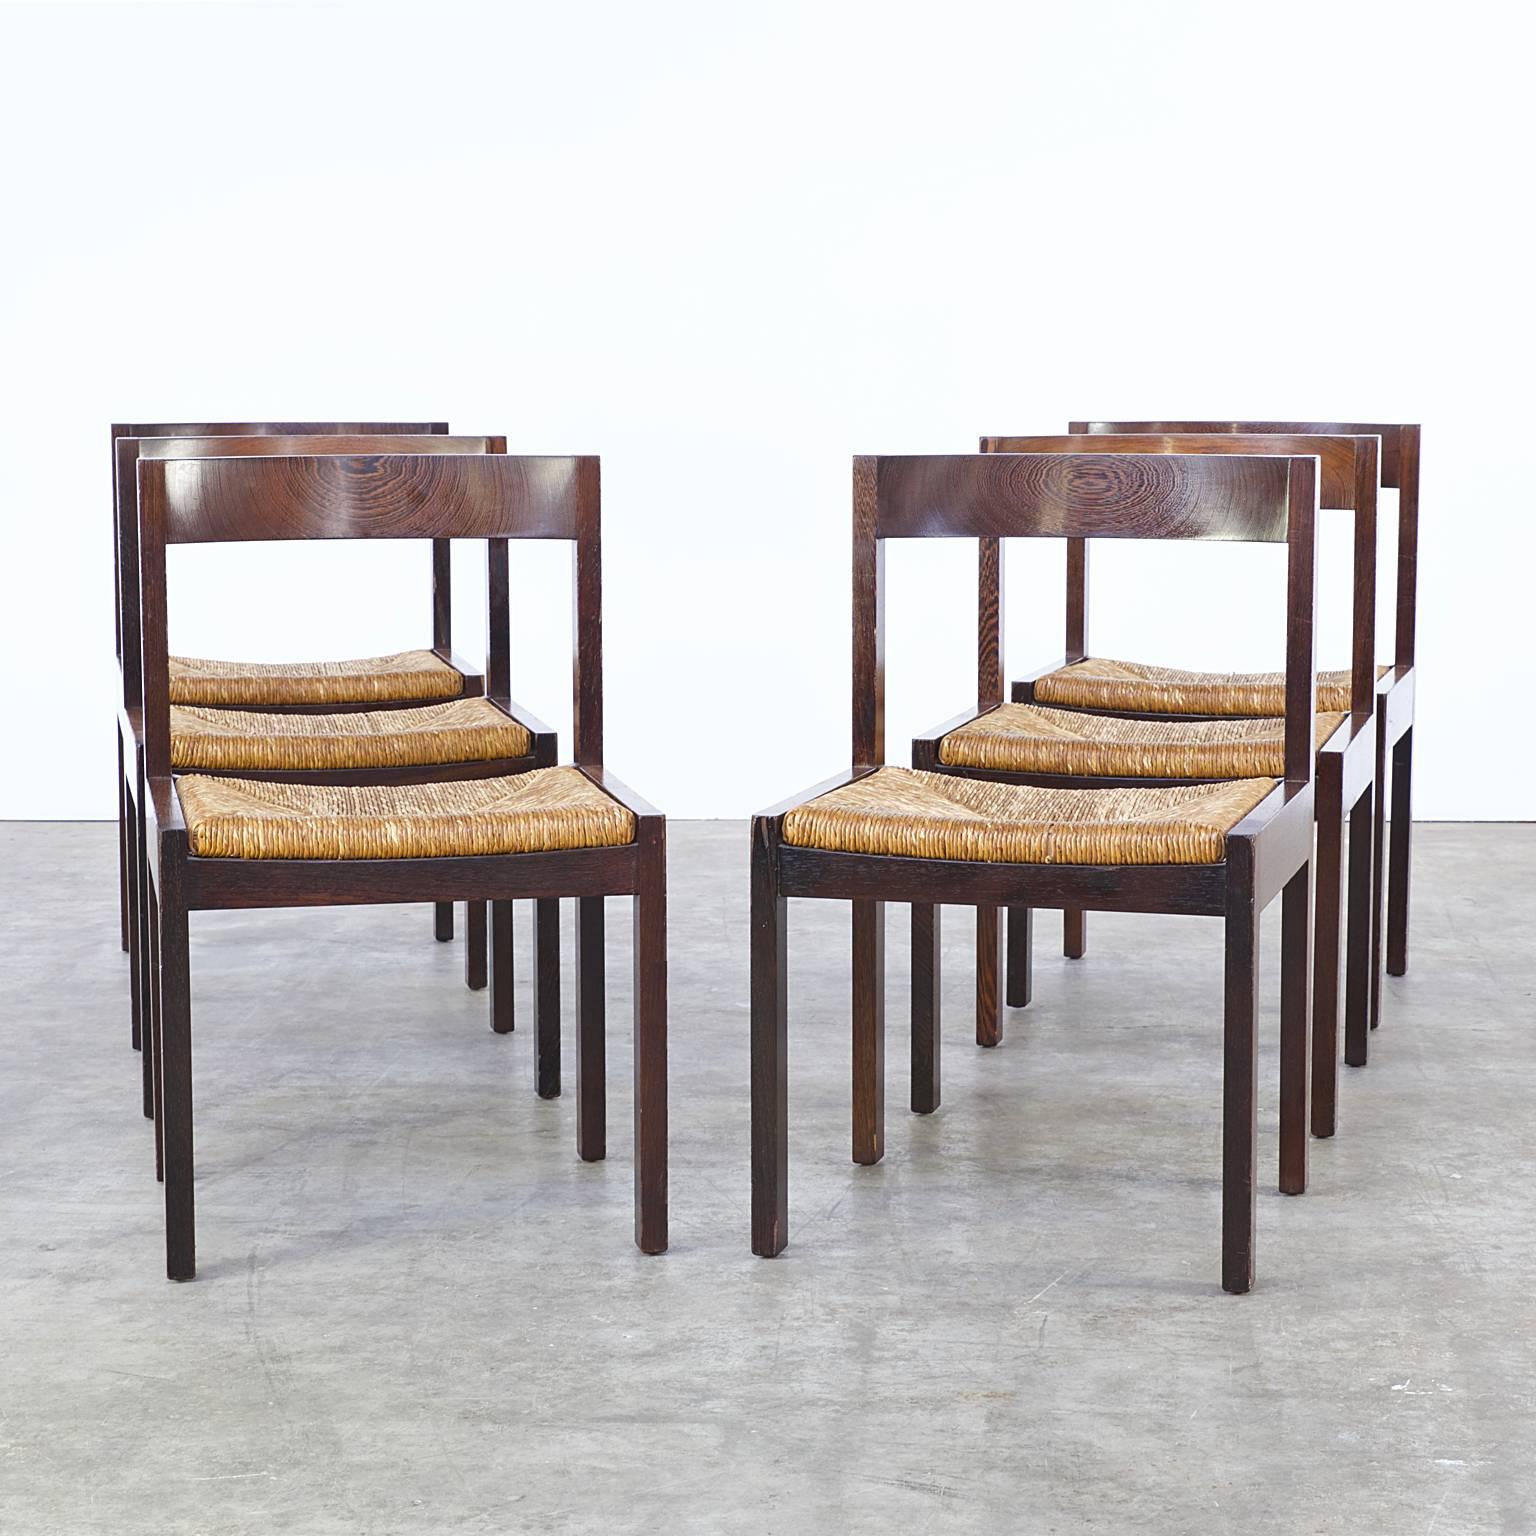 Set of six 1960s Martin Visser wengé dining chair for 't Spectrum. Wenge wood, wicker seating. Good condition, wear consistant with age and use. Dimensions: 48cm (W) x 48cm (D) x 76cm (H), seat 44cm.